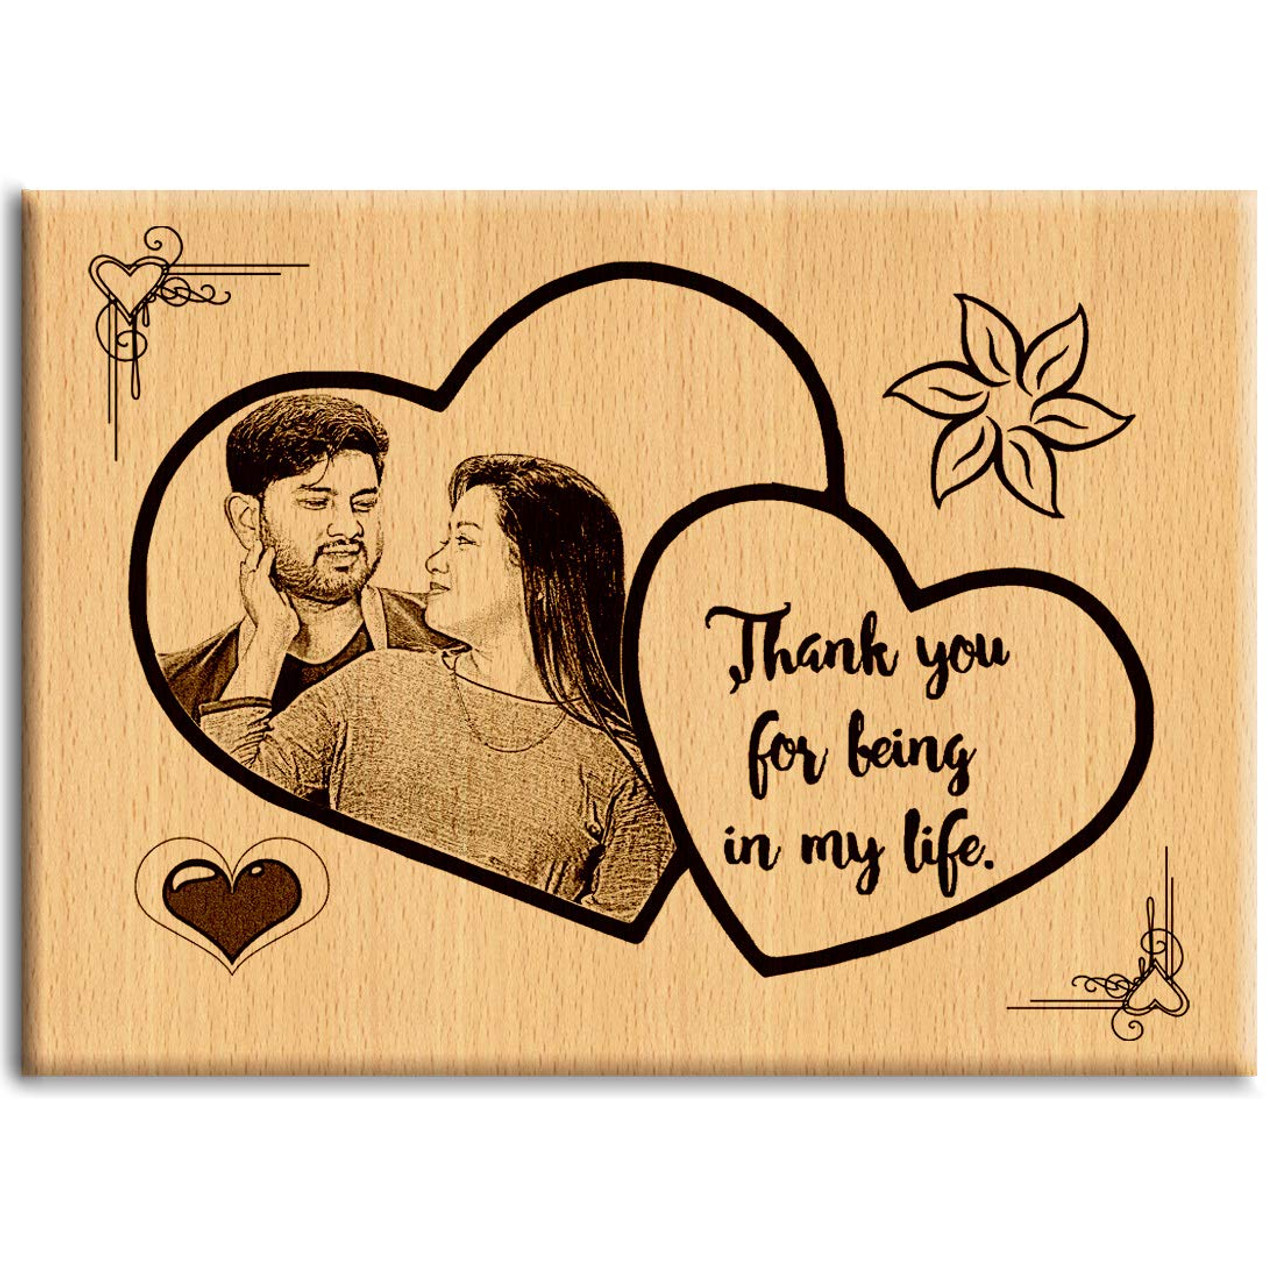 Unique Personalized Gifts Online in India | Send Customized Gifts To Your  Loved Ones